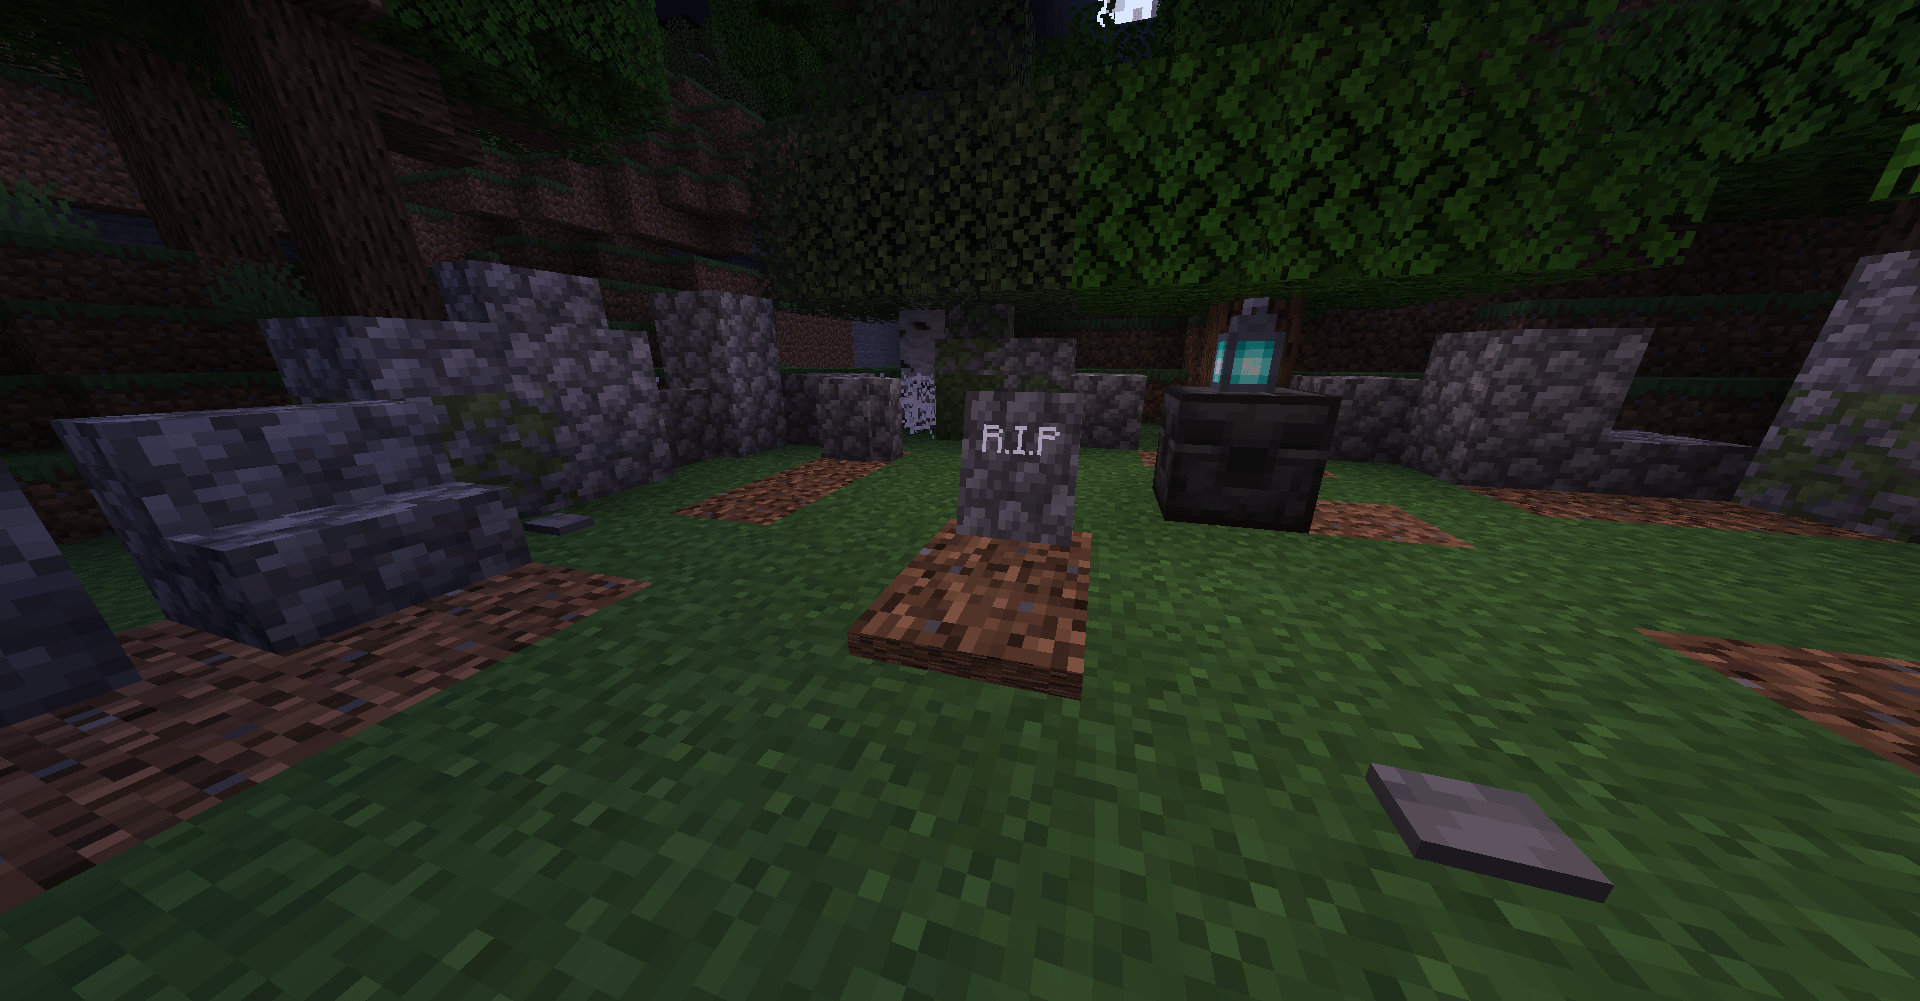 When a player dies they will leave a grave. They will usually display the name of the dead player rather than "R.I.P"